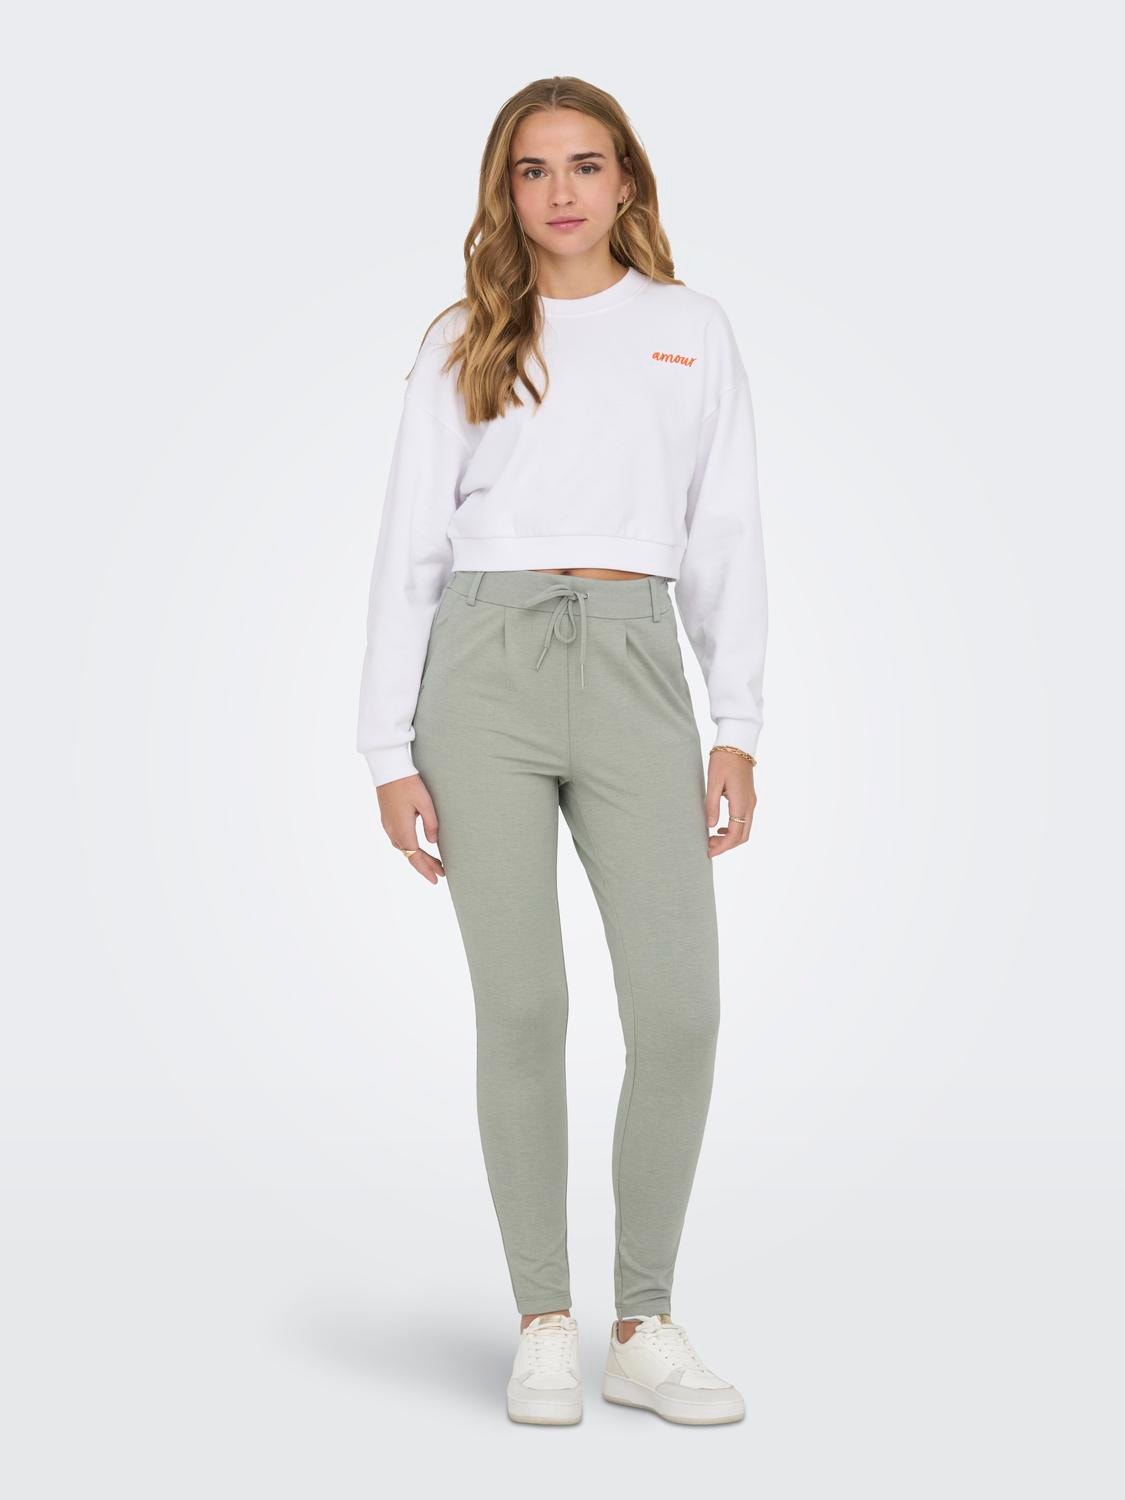 ONLY Effen Broek -Lily Pad - 15115847